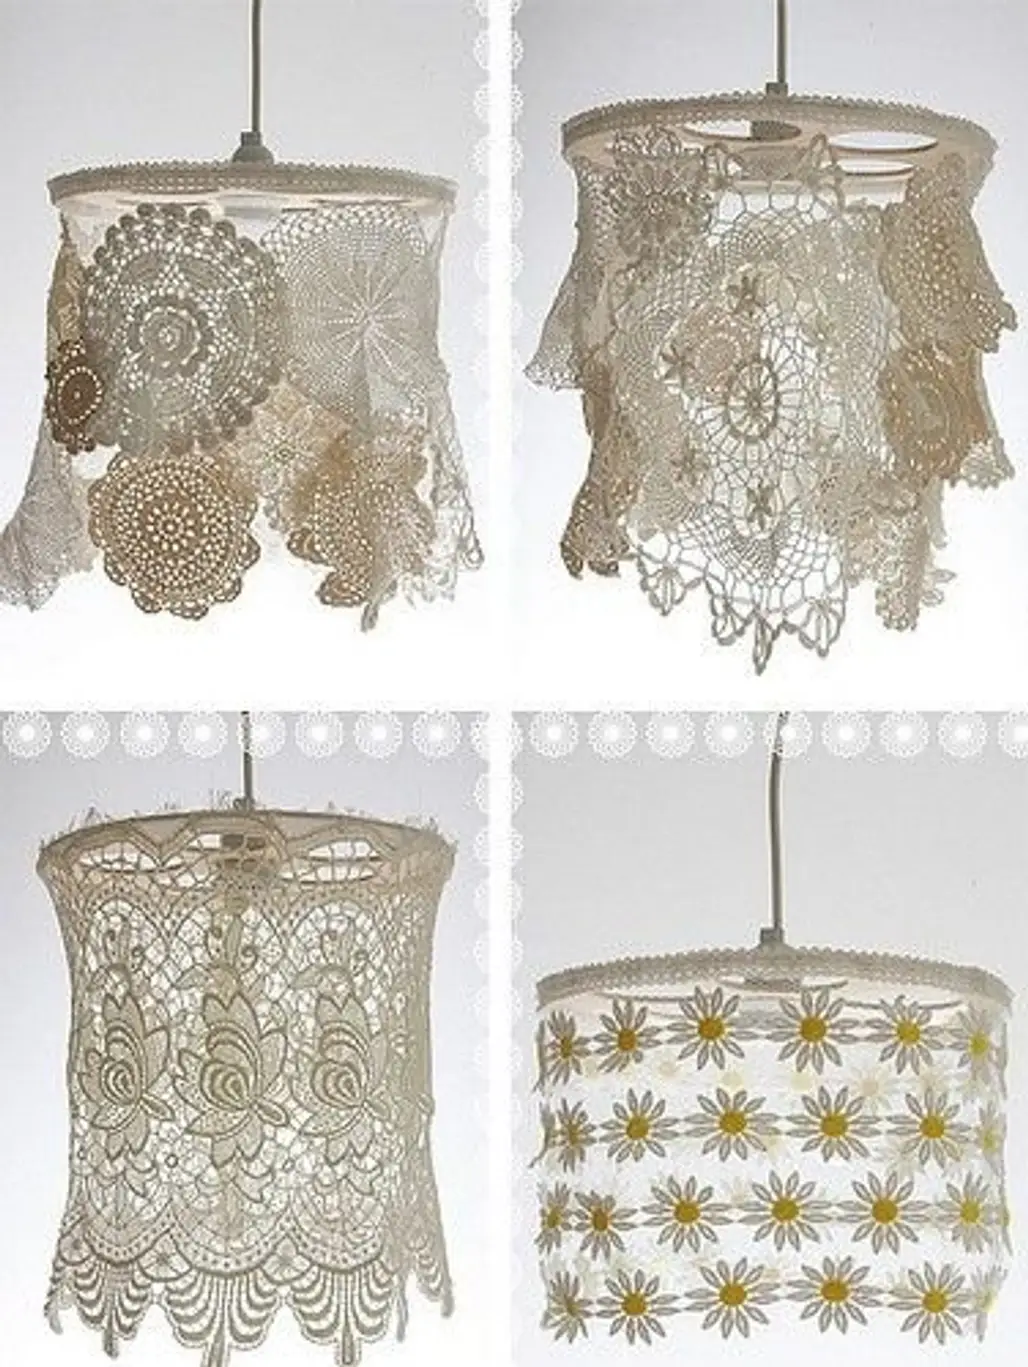 Upcycle Some Old Lampshade Rings